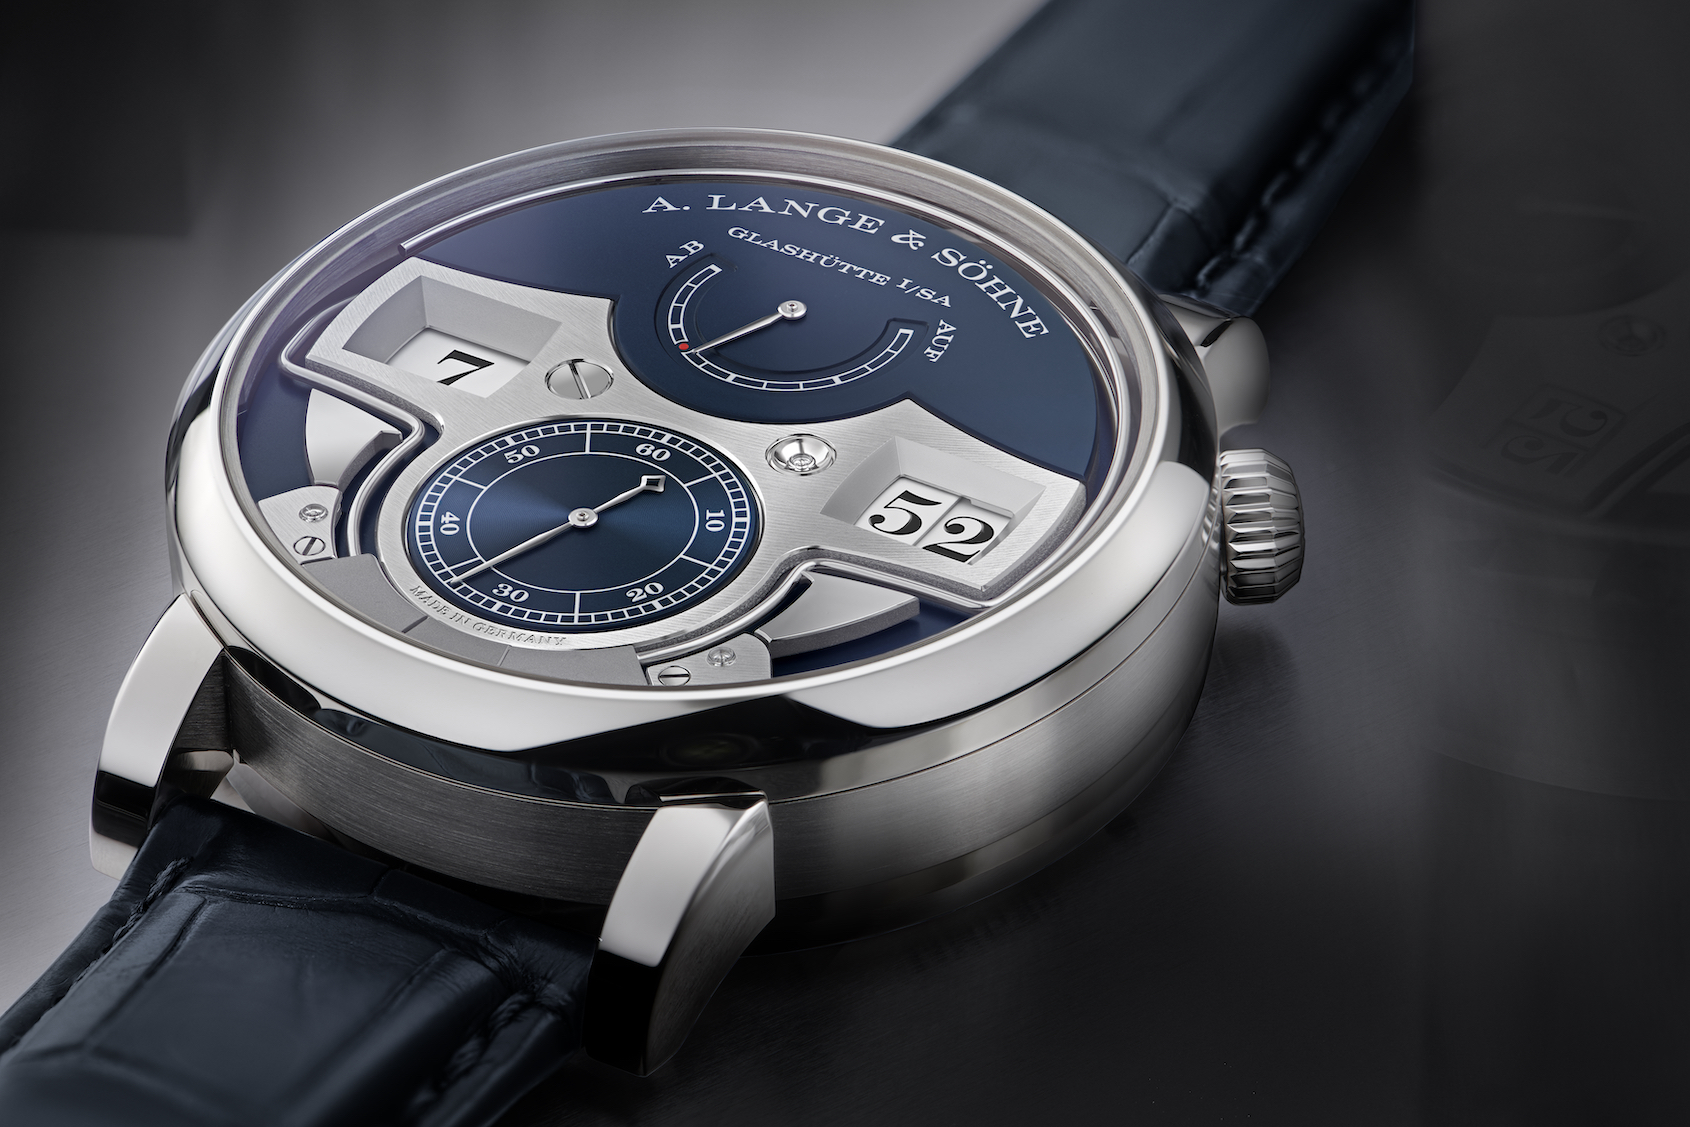 INTRODUCING: The A. Lange & Söhne Zeitwerk Minute Repeater, the three-quarters of a million dollar watch